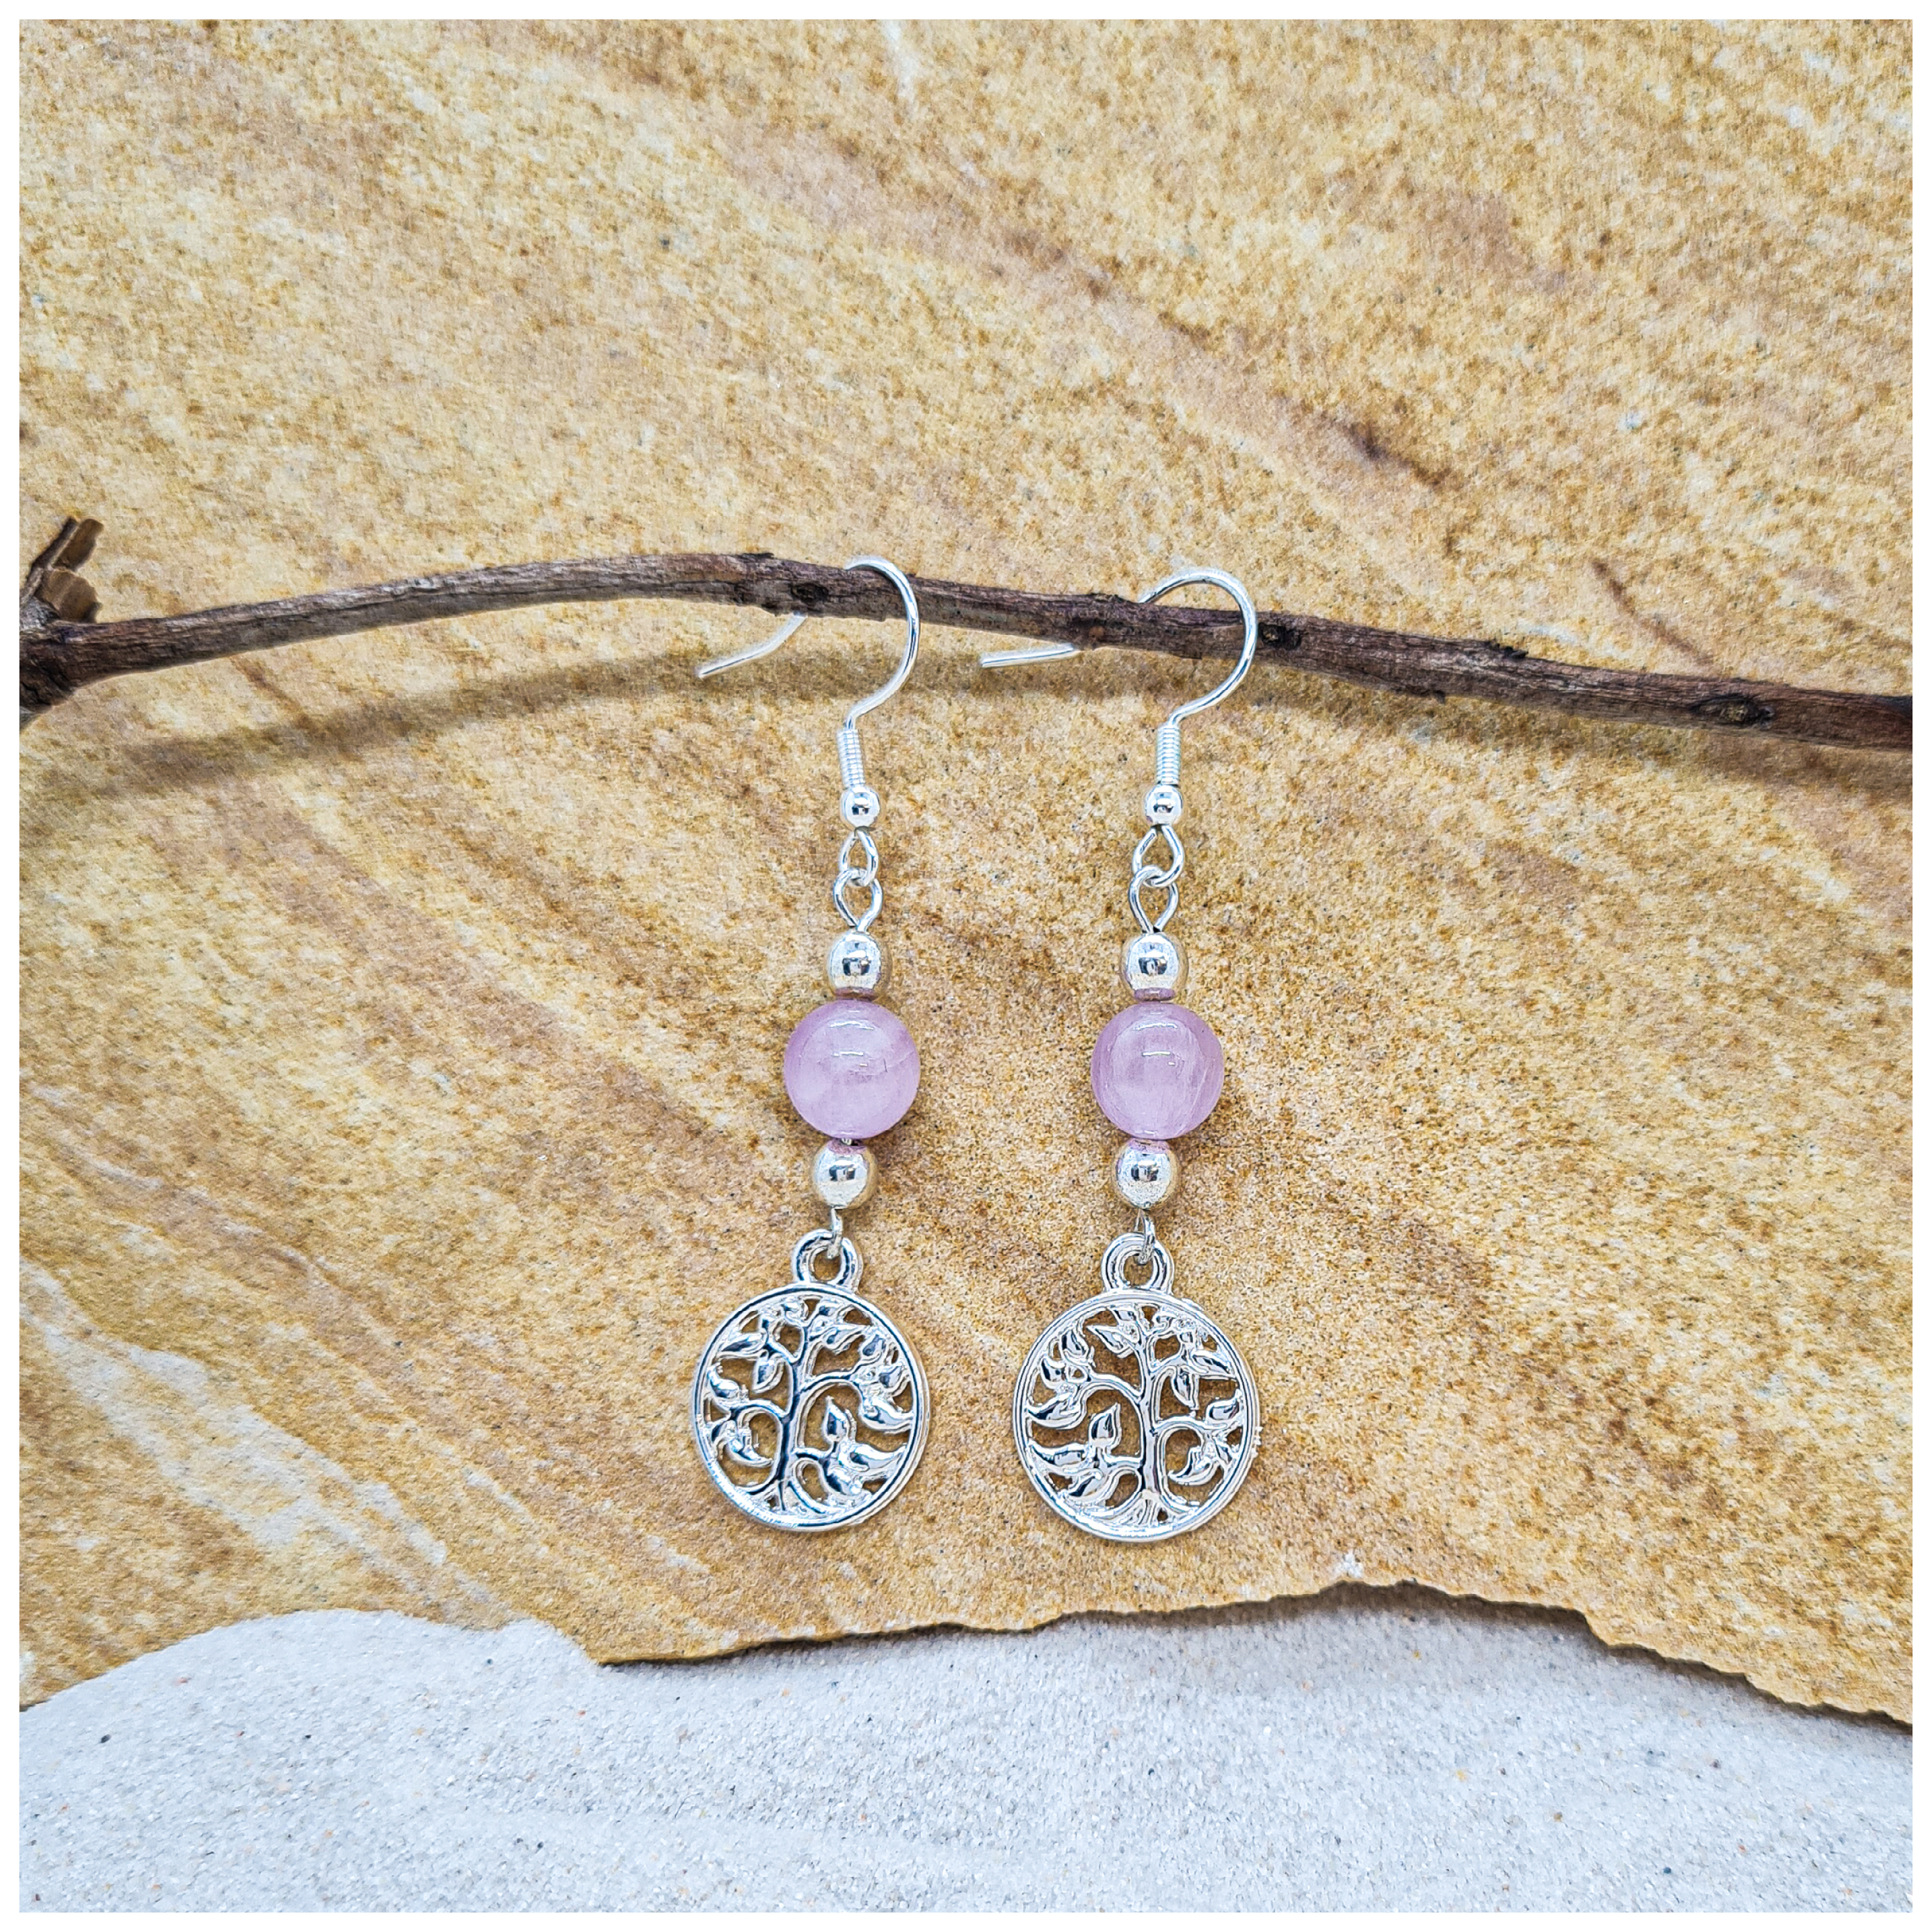 Kunzite 8mm crystal bead drop earring with silver tree of life charm